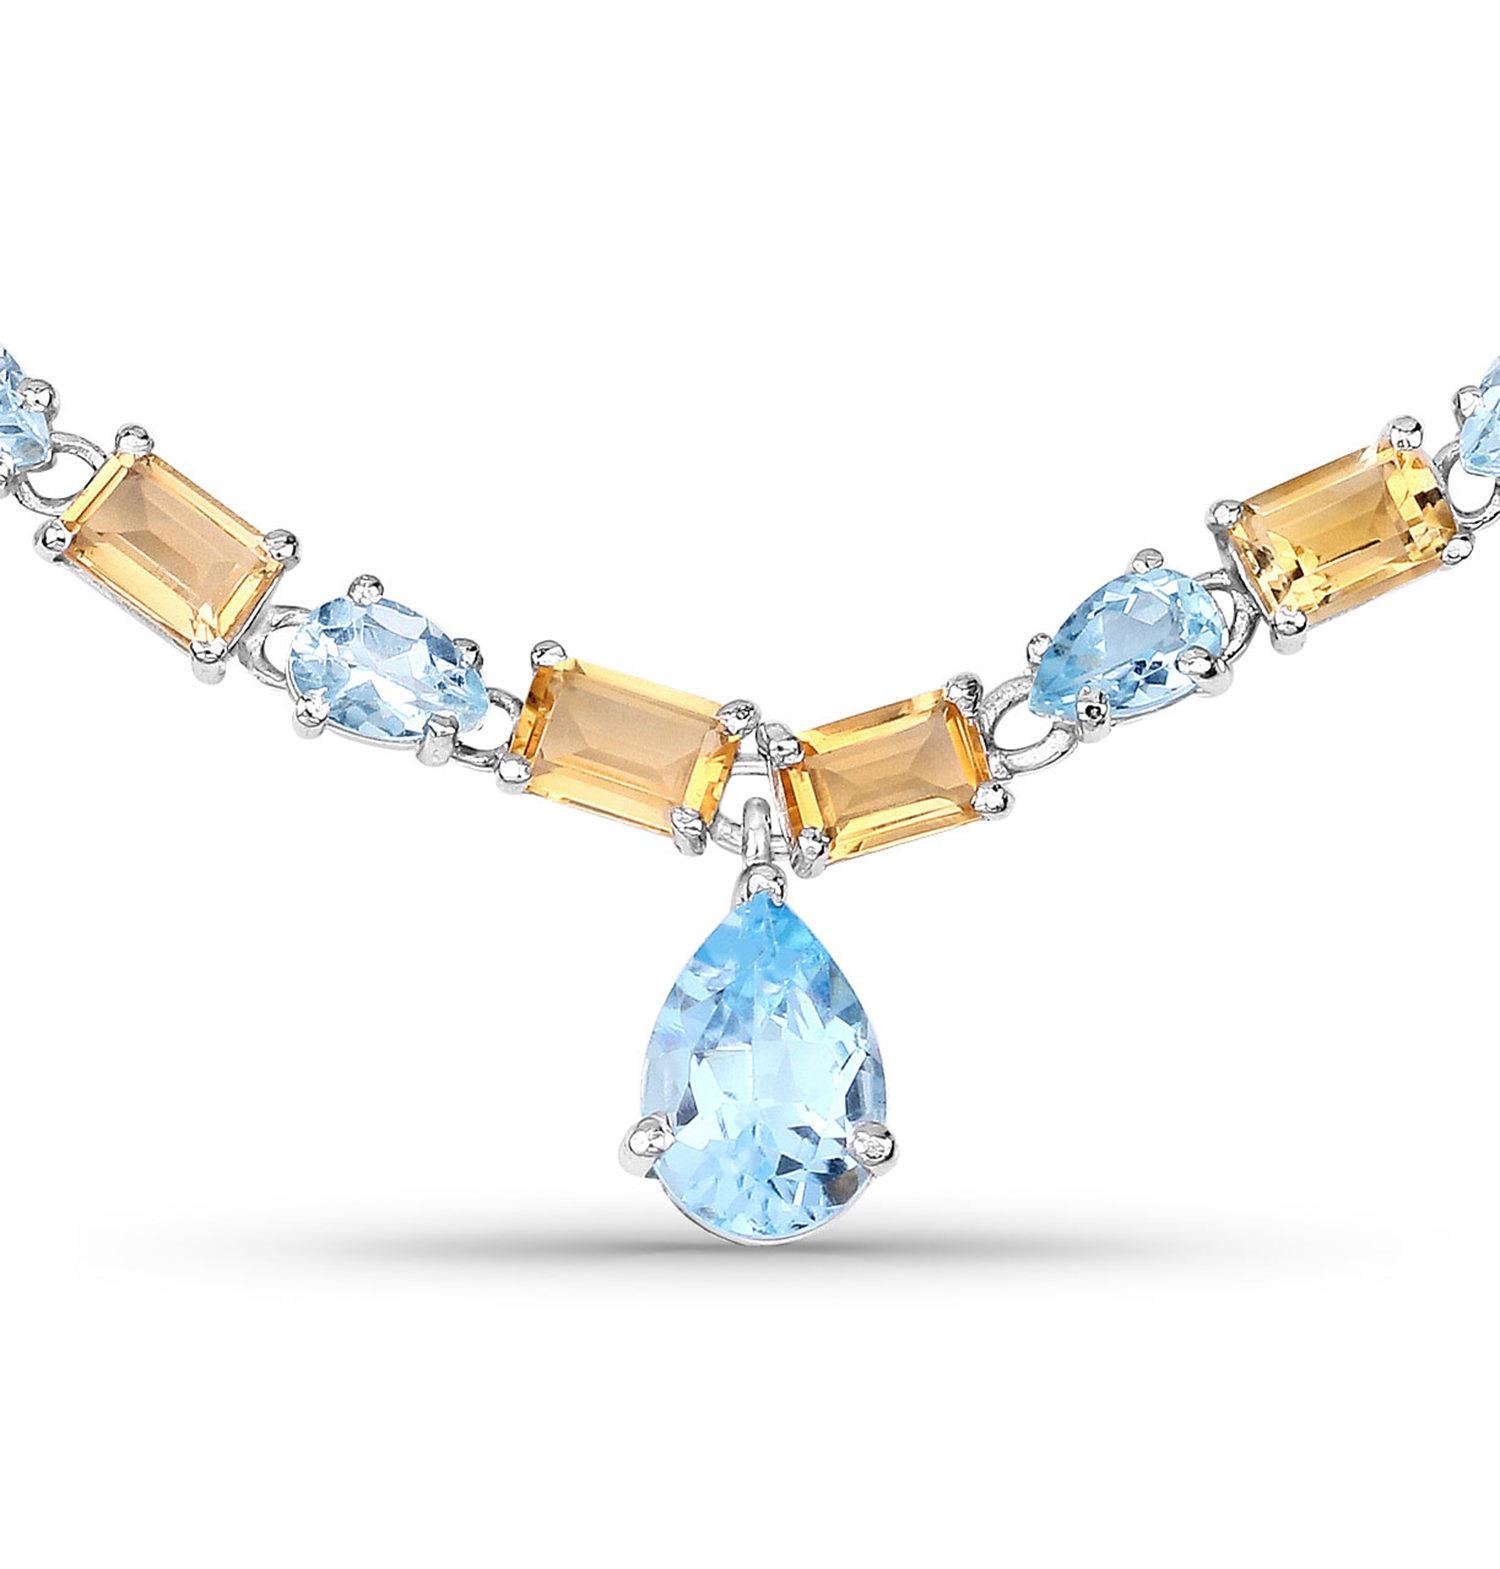 It comes with the appraisal by GIA GG/AJP
Blue Topaz = 1.90 Carat ( 10 x 7 mm )
Cut: Pear
Color: Blue
Total Quantity of Topaz: 1
Blue Topaz = 16.40 Carat ( 6 x 4 mm )
Cut: Pear
Total Quantity of Topaz: 34 
Citrine = 18.70 Carats ( 6 x 4 mm )
Cut: